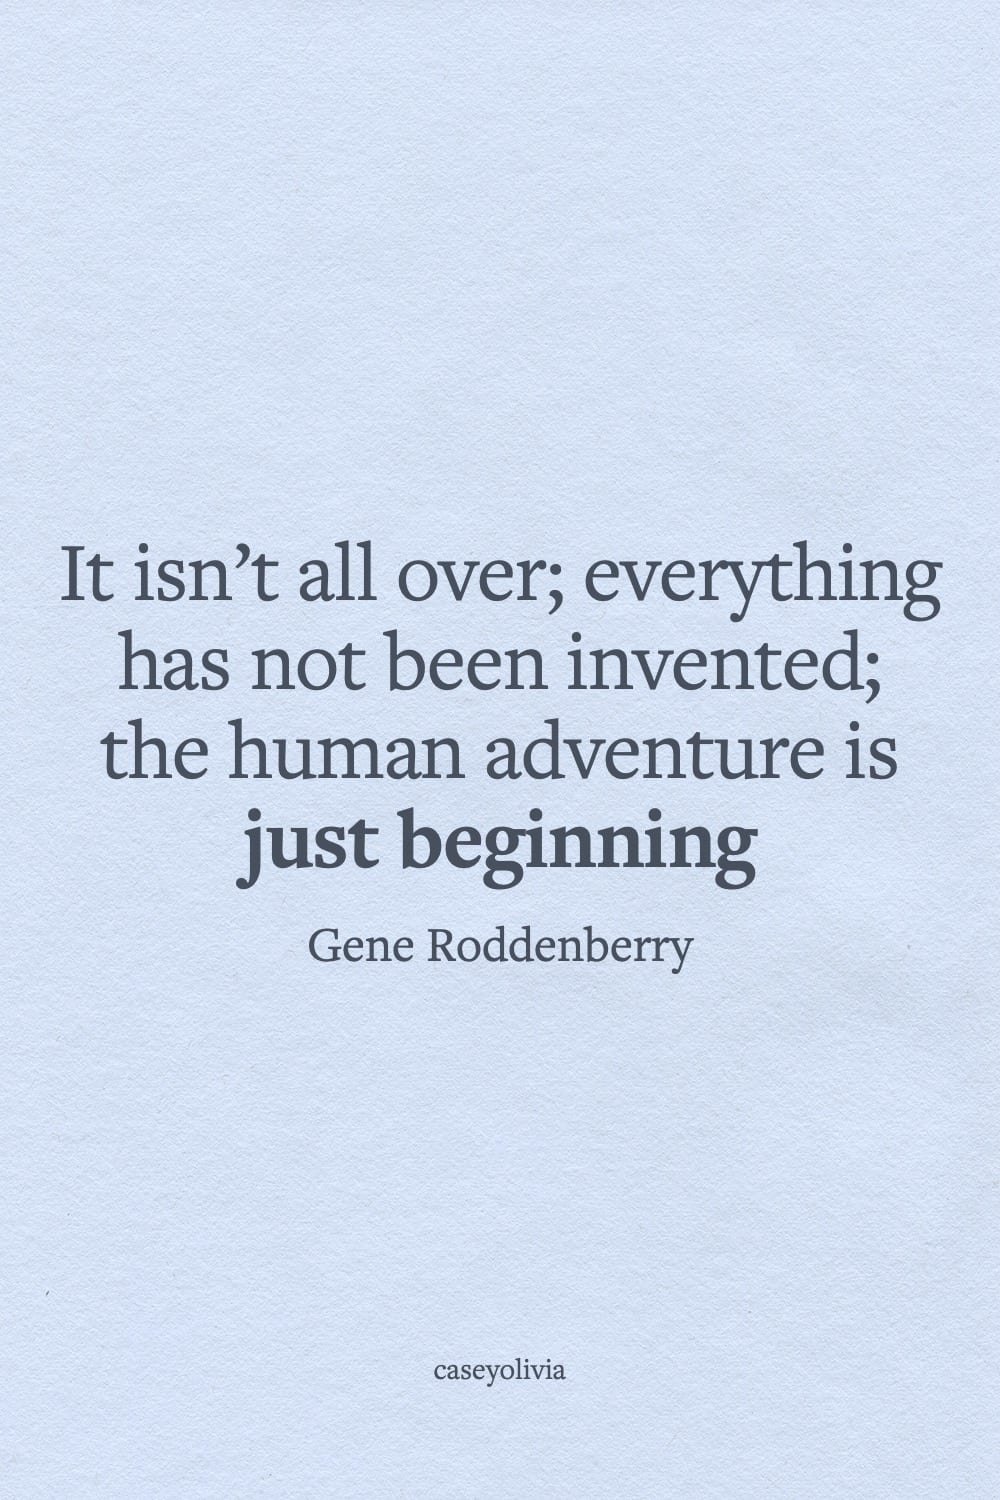 human adventure is just beginning optimistic quote for students